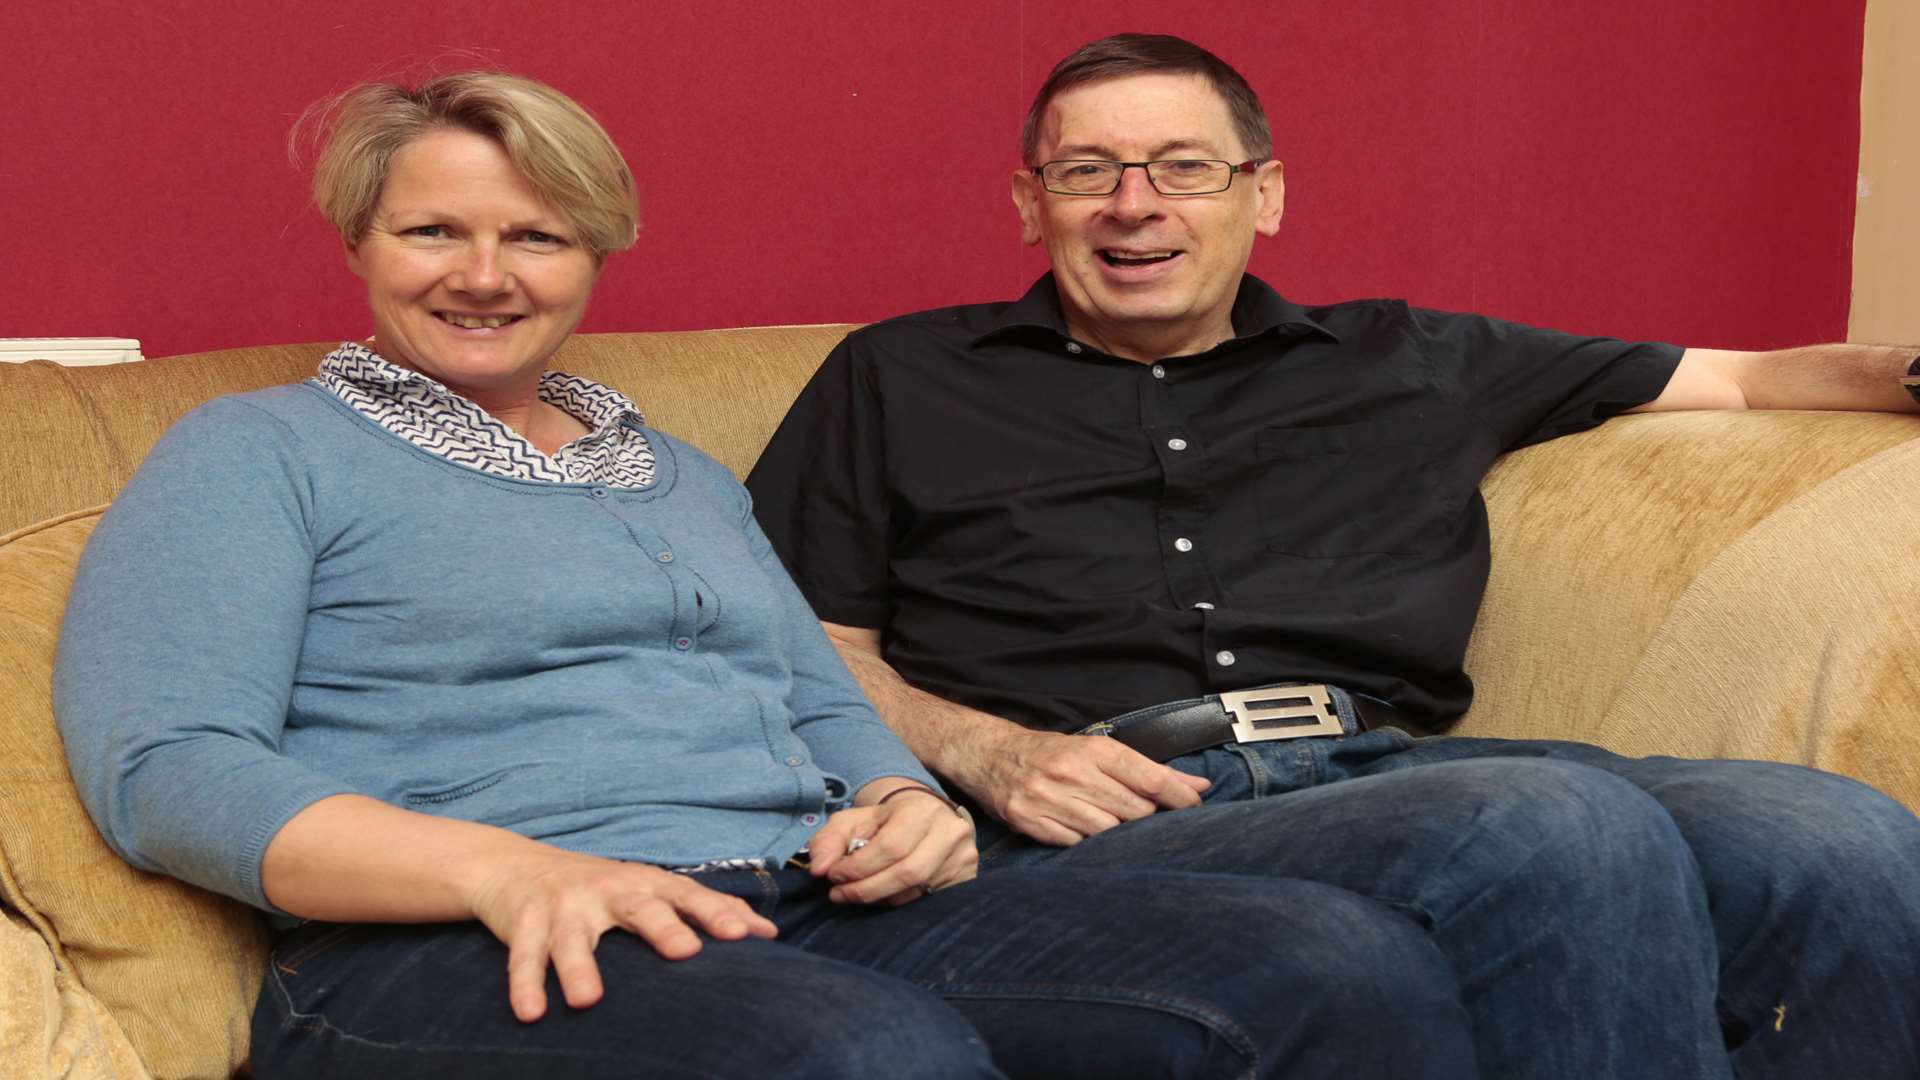 David Grant and his wife Lisa discussed his survival plan after he left hospital nearly 10 years ago